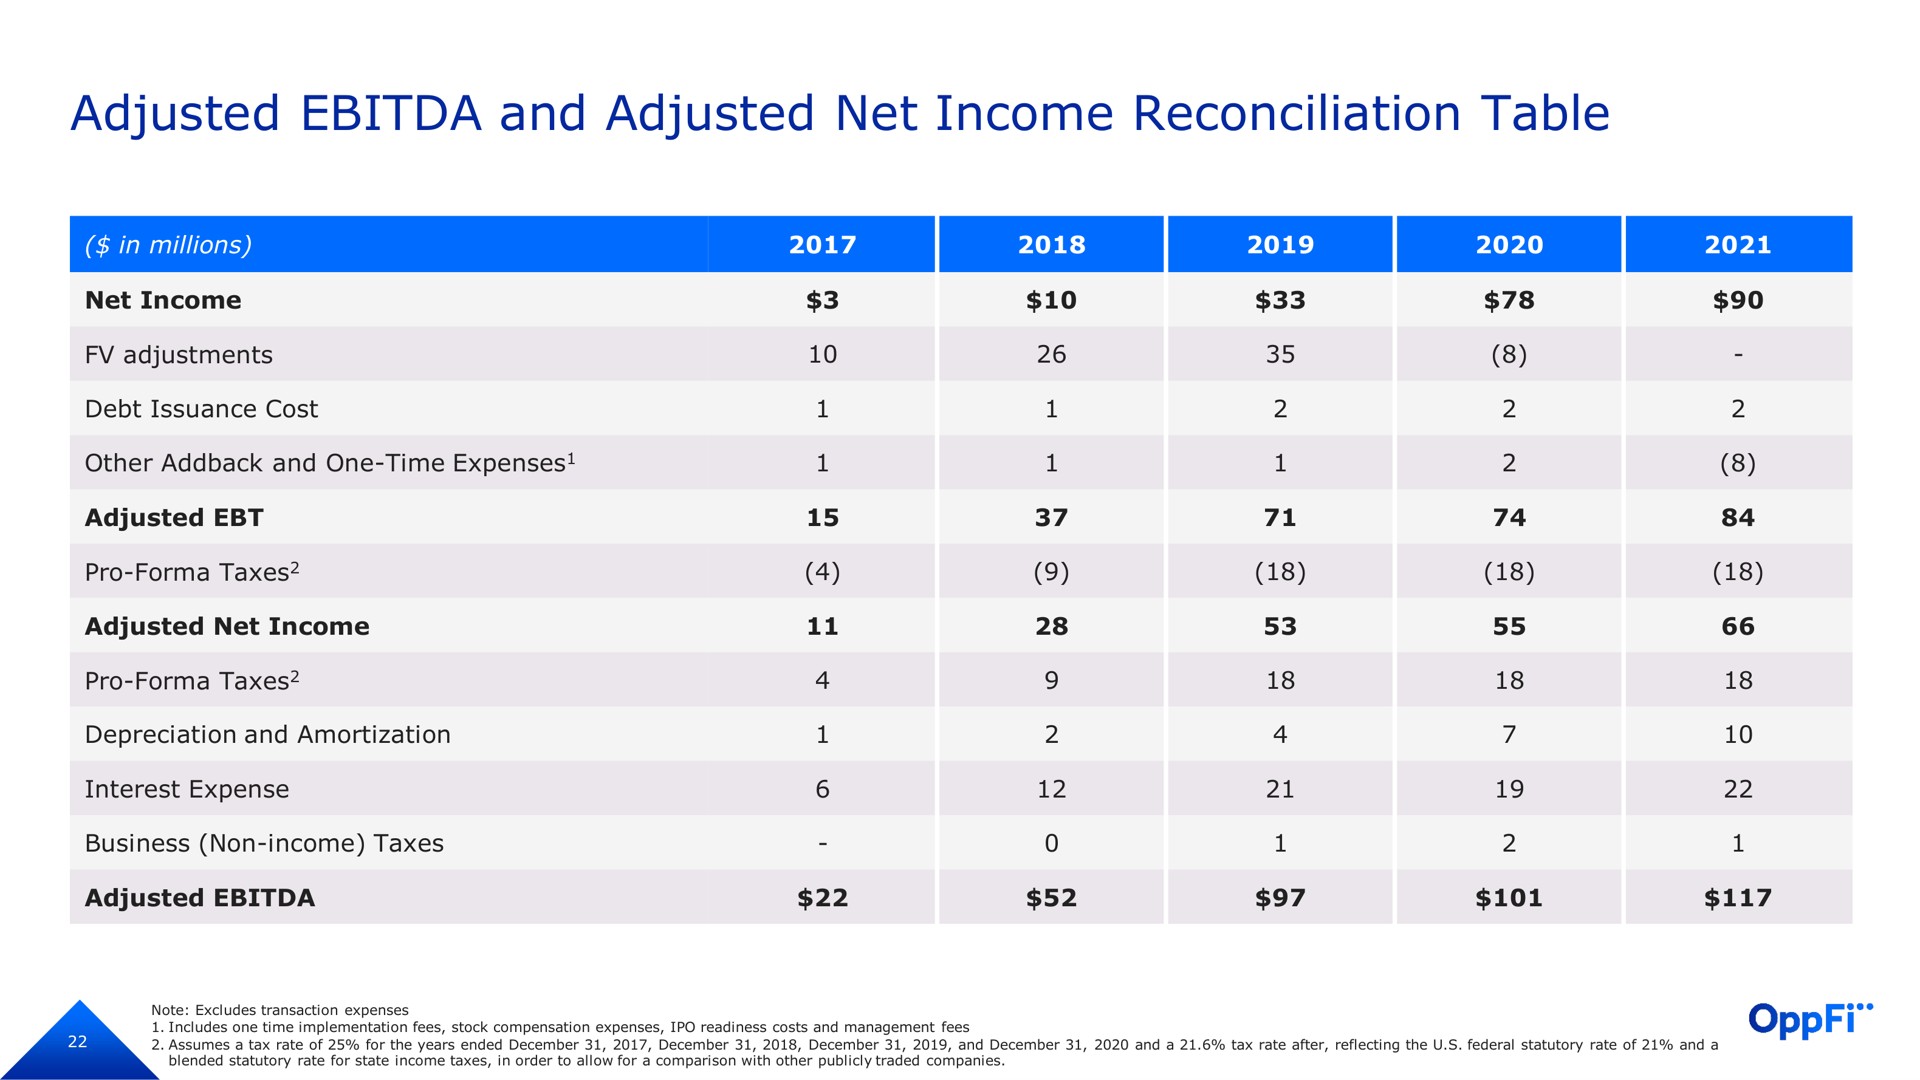 adjusted and adjusted net income reconciliation table | OppFi